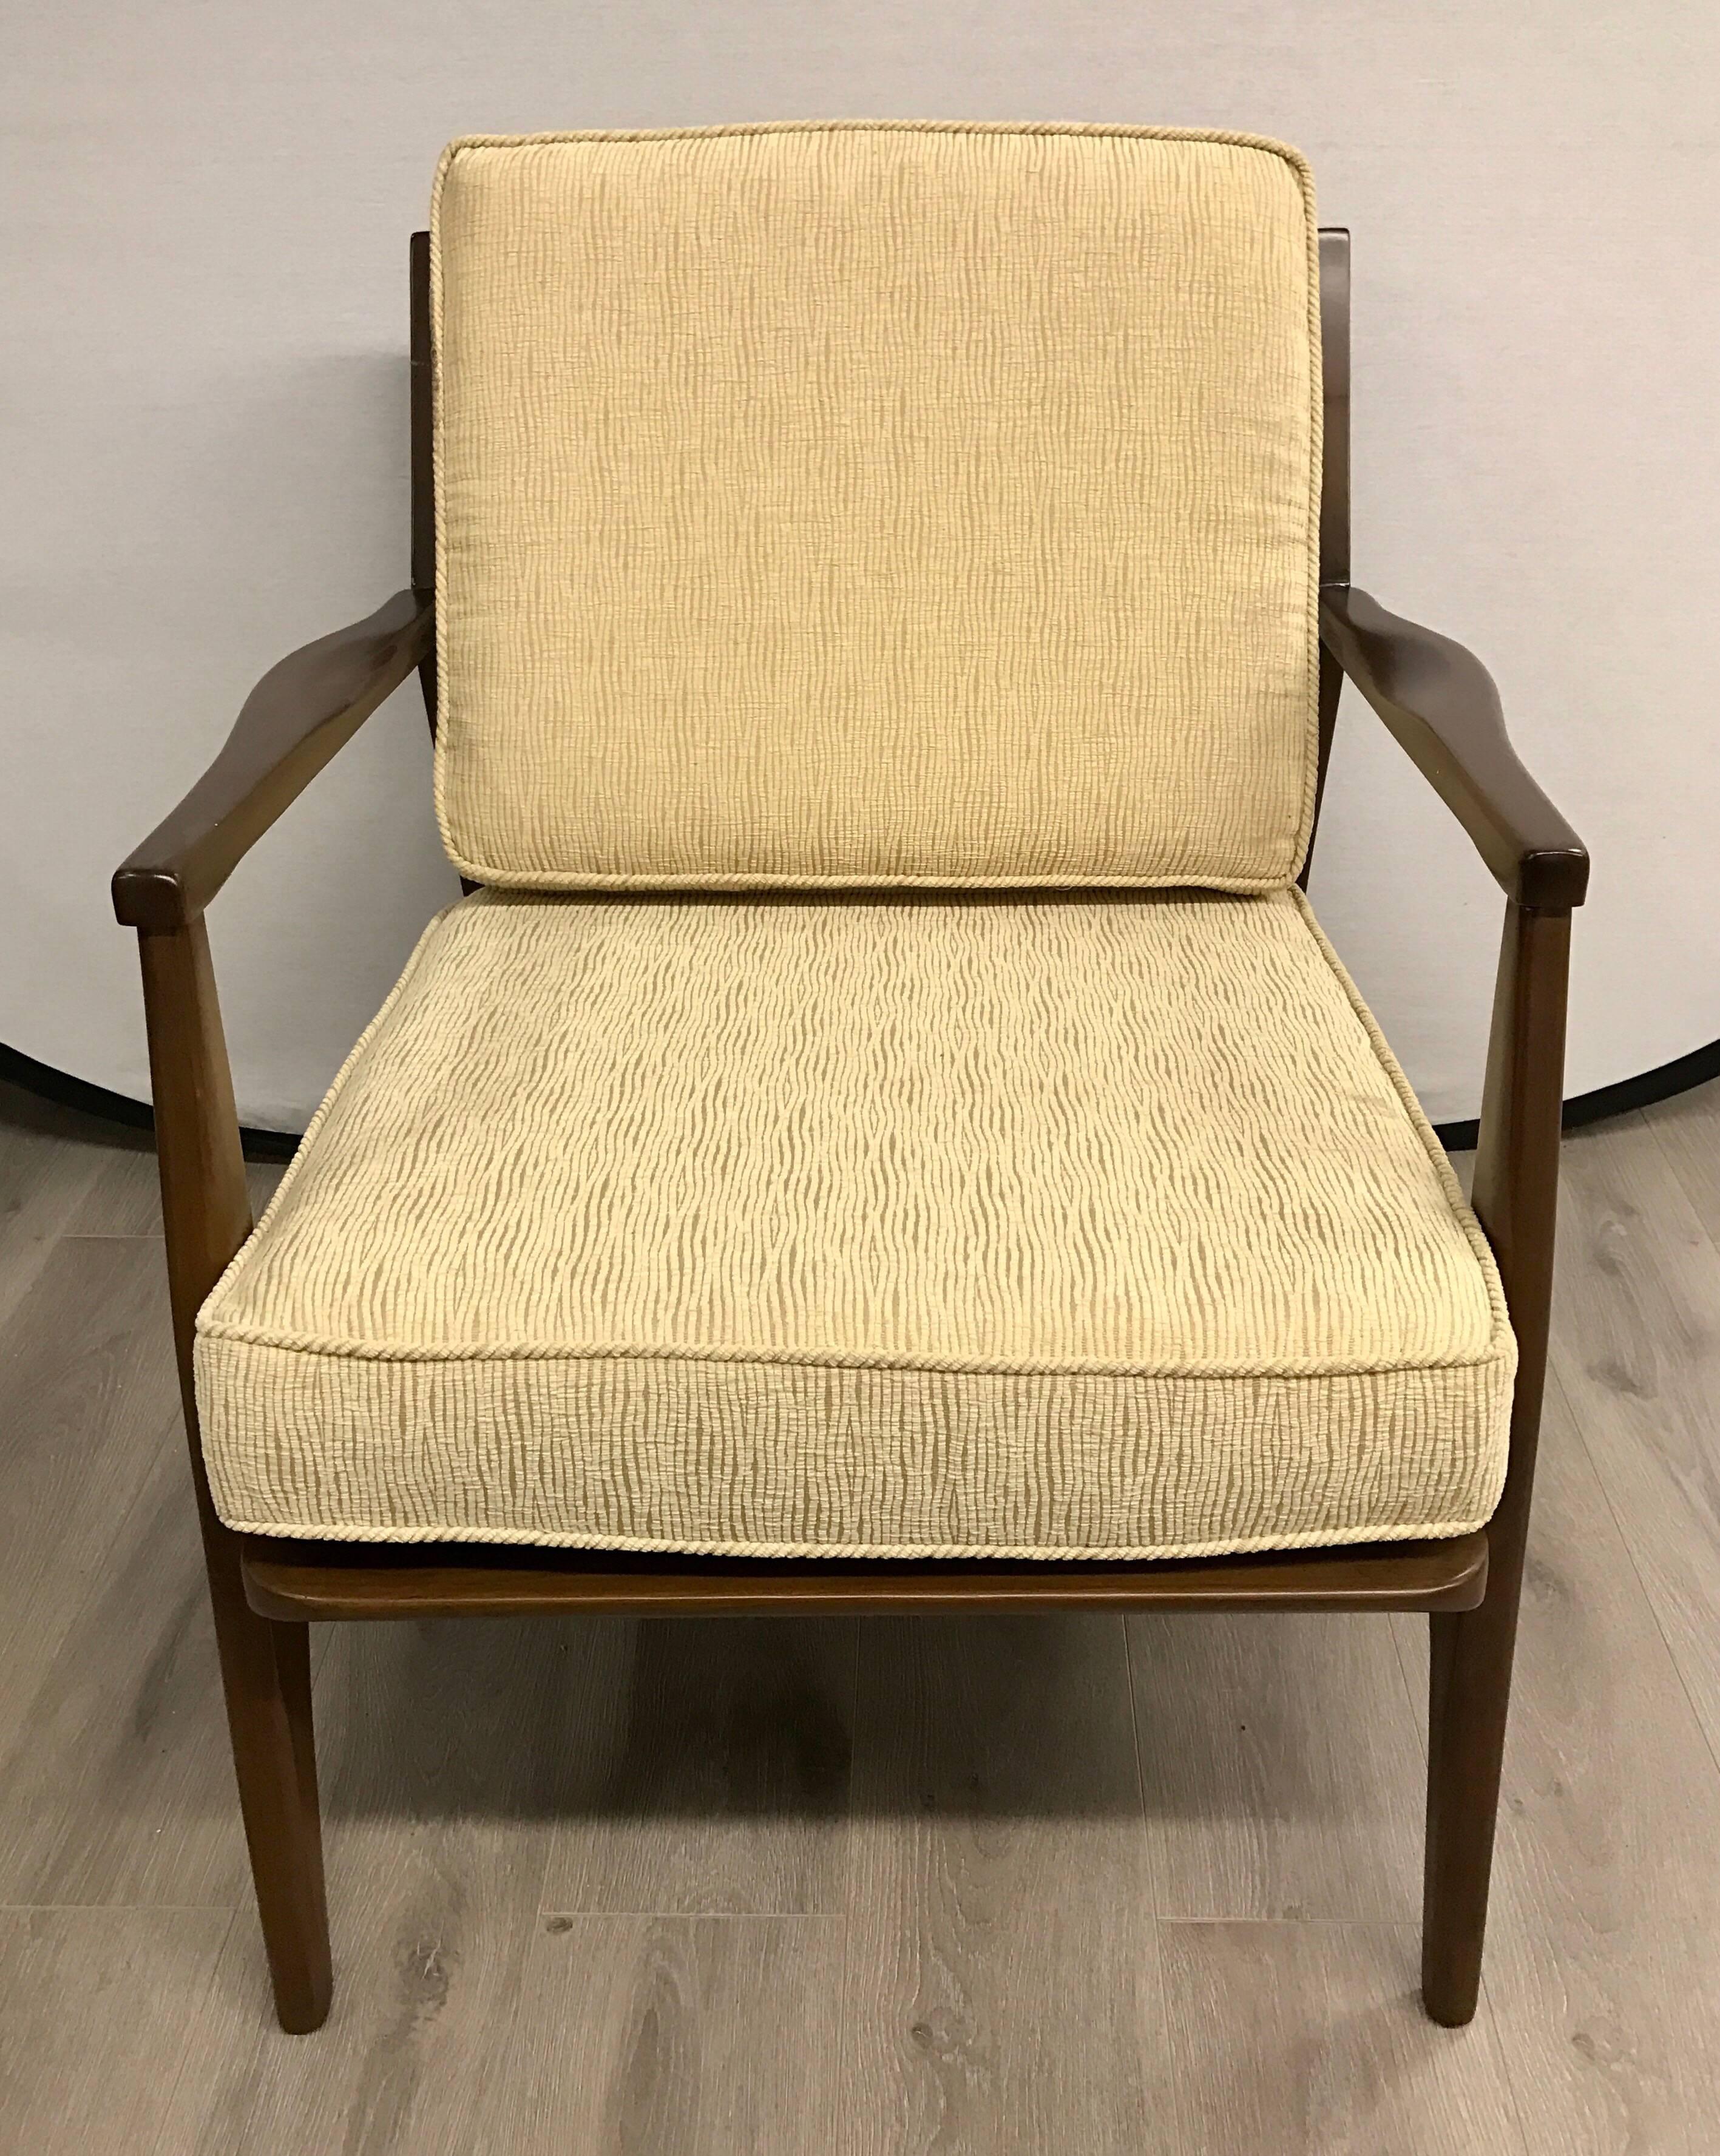 Elegant, newly reupholstered, pair of 1960s Danish dark teak arm chairs. Fabric is a luxurious woven textured cotton and is the color of straw, see pics.